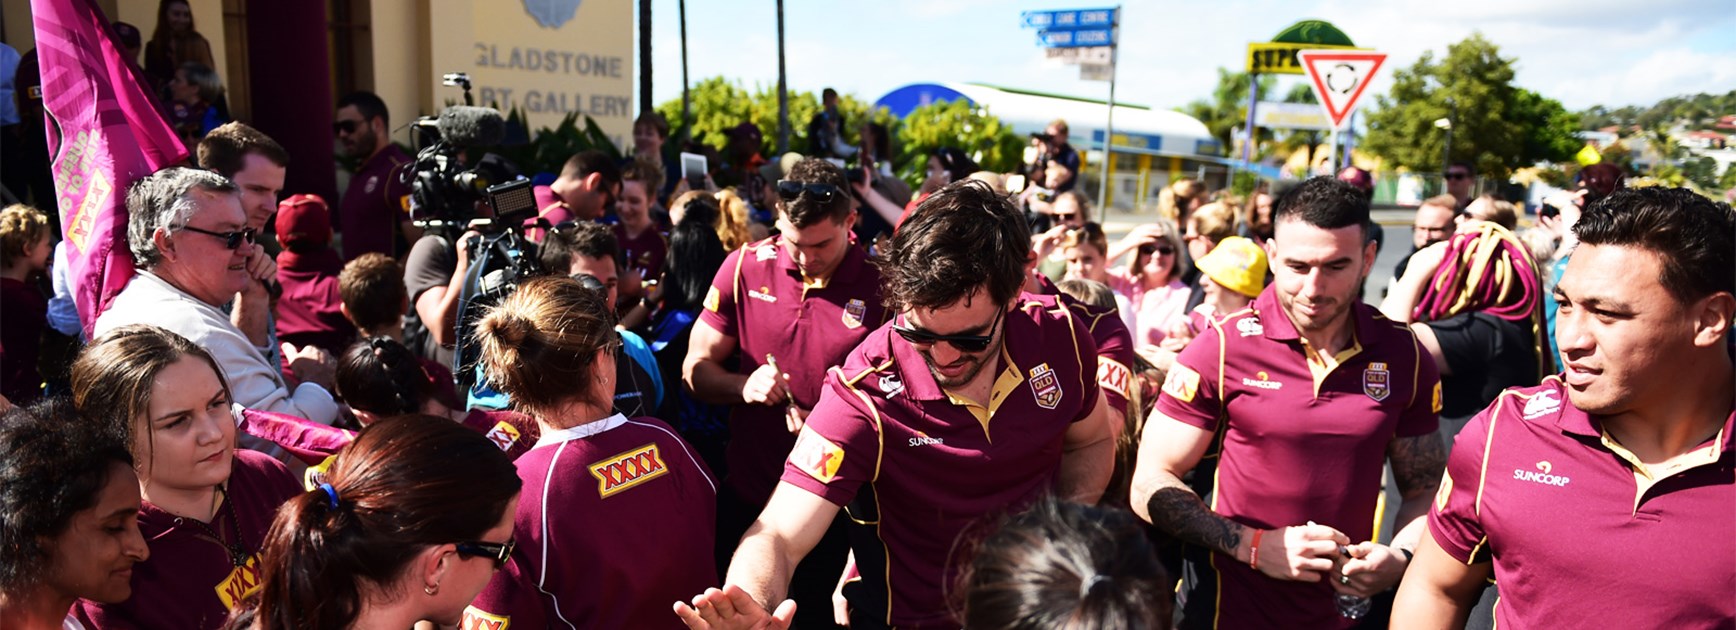 The Maroons meet with fans in Gladstone, Queensland.